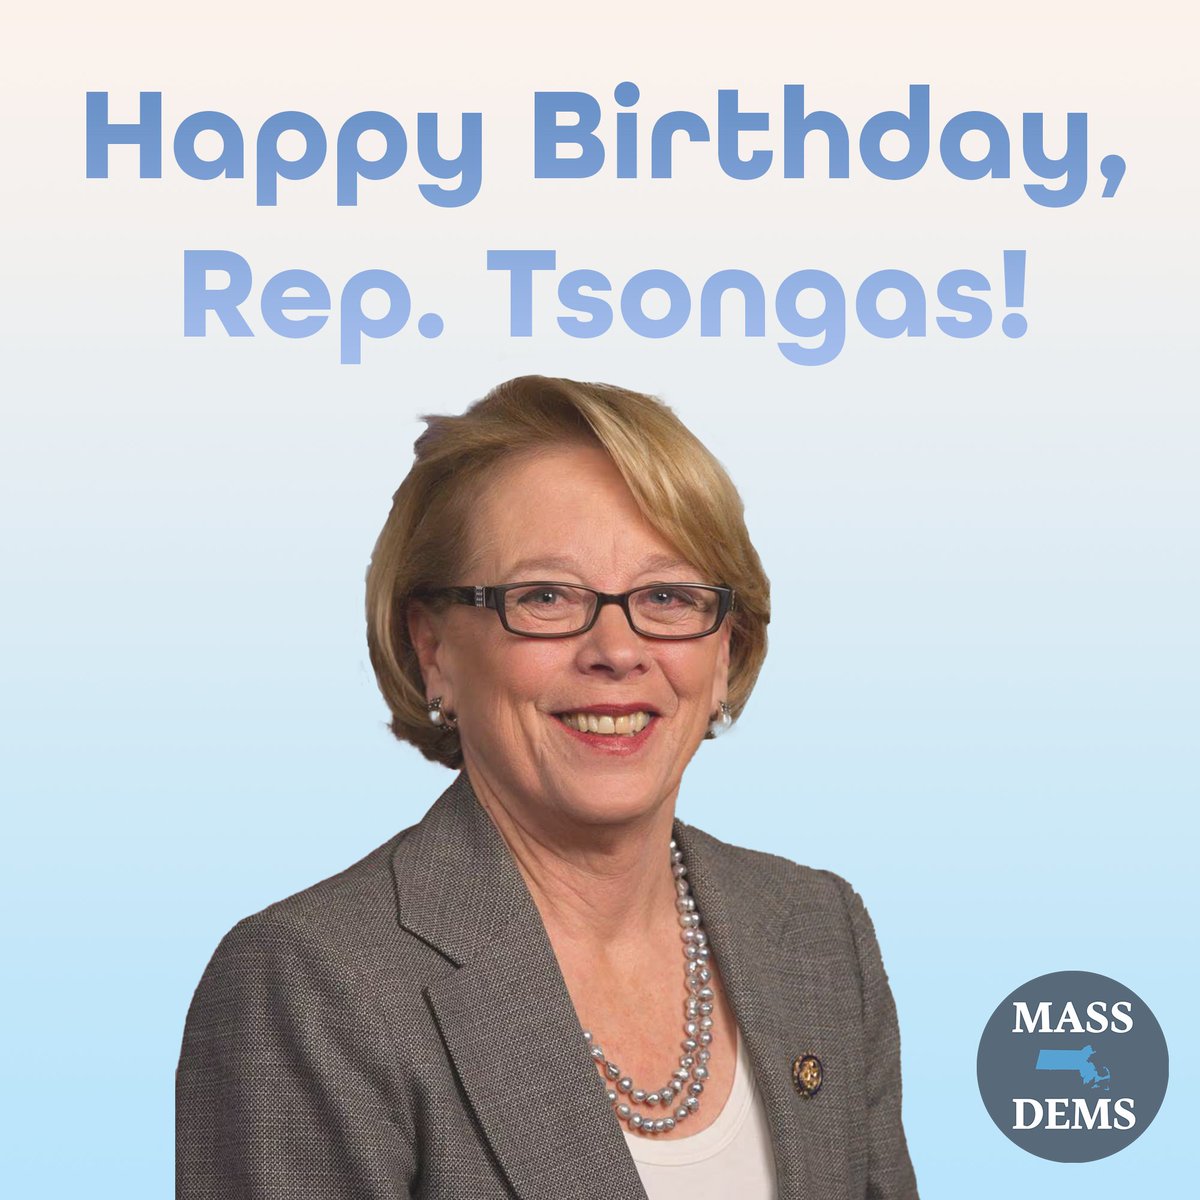 A very happy birthday to our former Rep. and forever friend of the Party, Niki Tsongas!